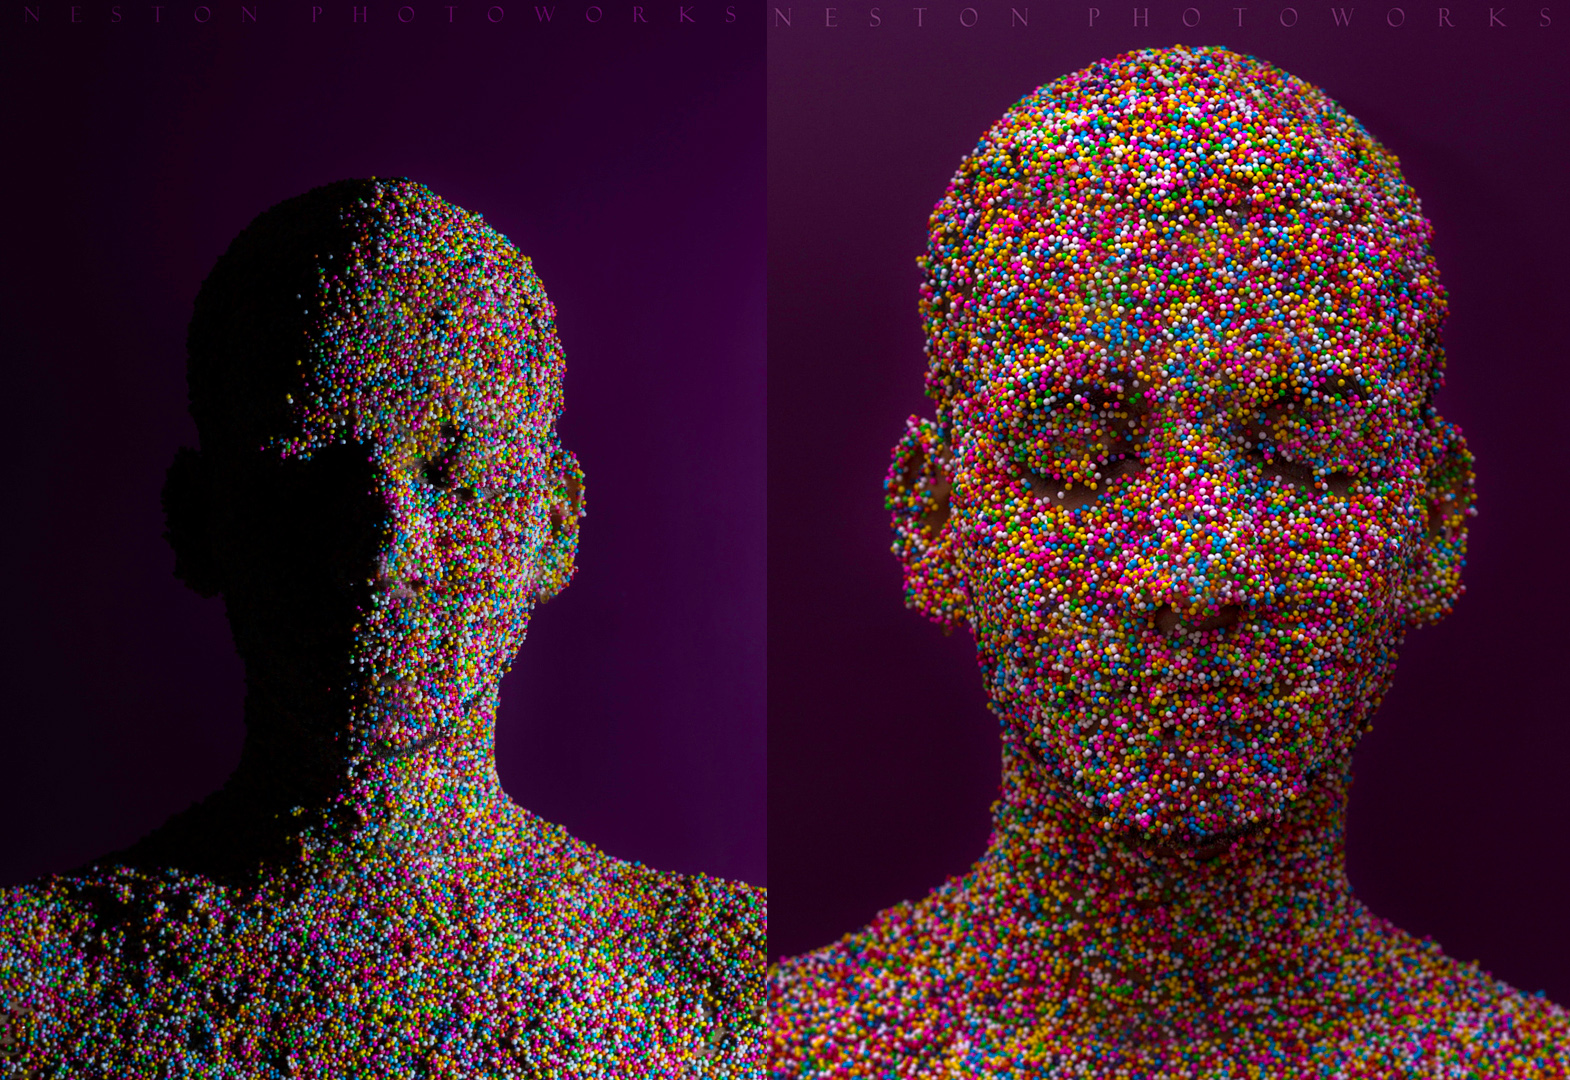 Crazy Portrait Idea: Cover Your Subject in... Sprinkles?